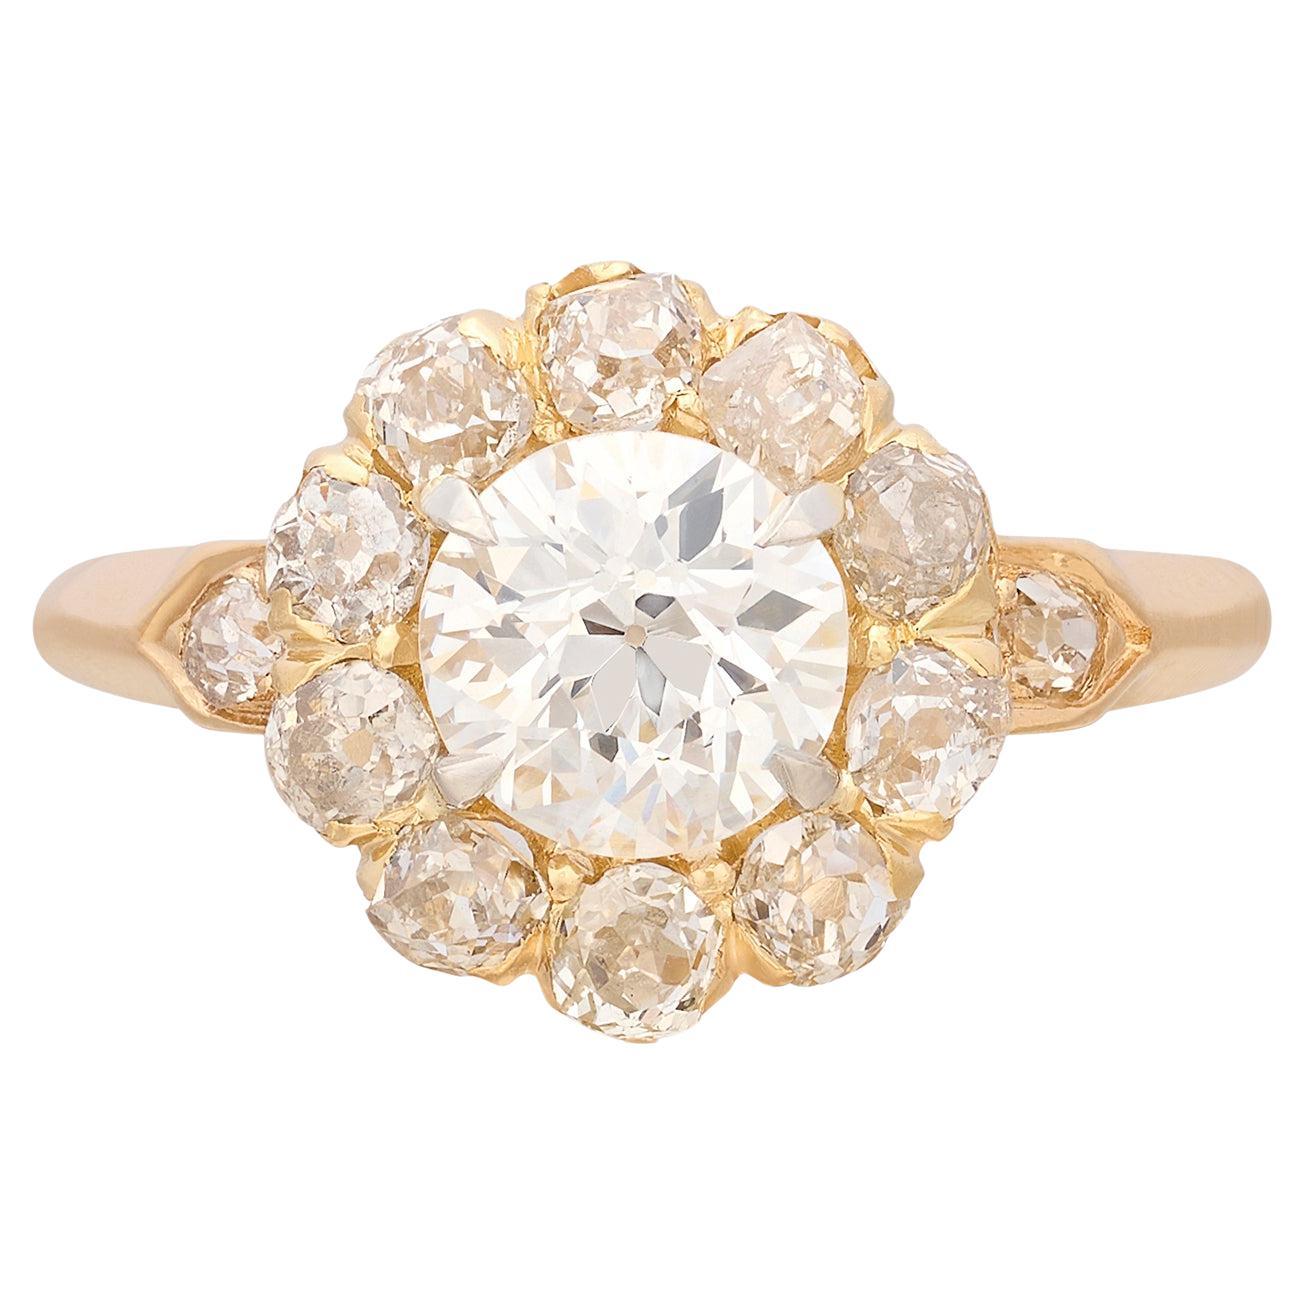 For Sale:  GIA 1.01-ct. Diamond & 18k Gold Antique Ring